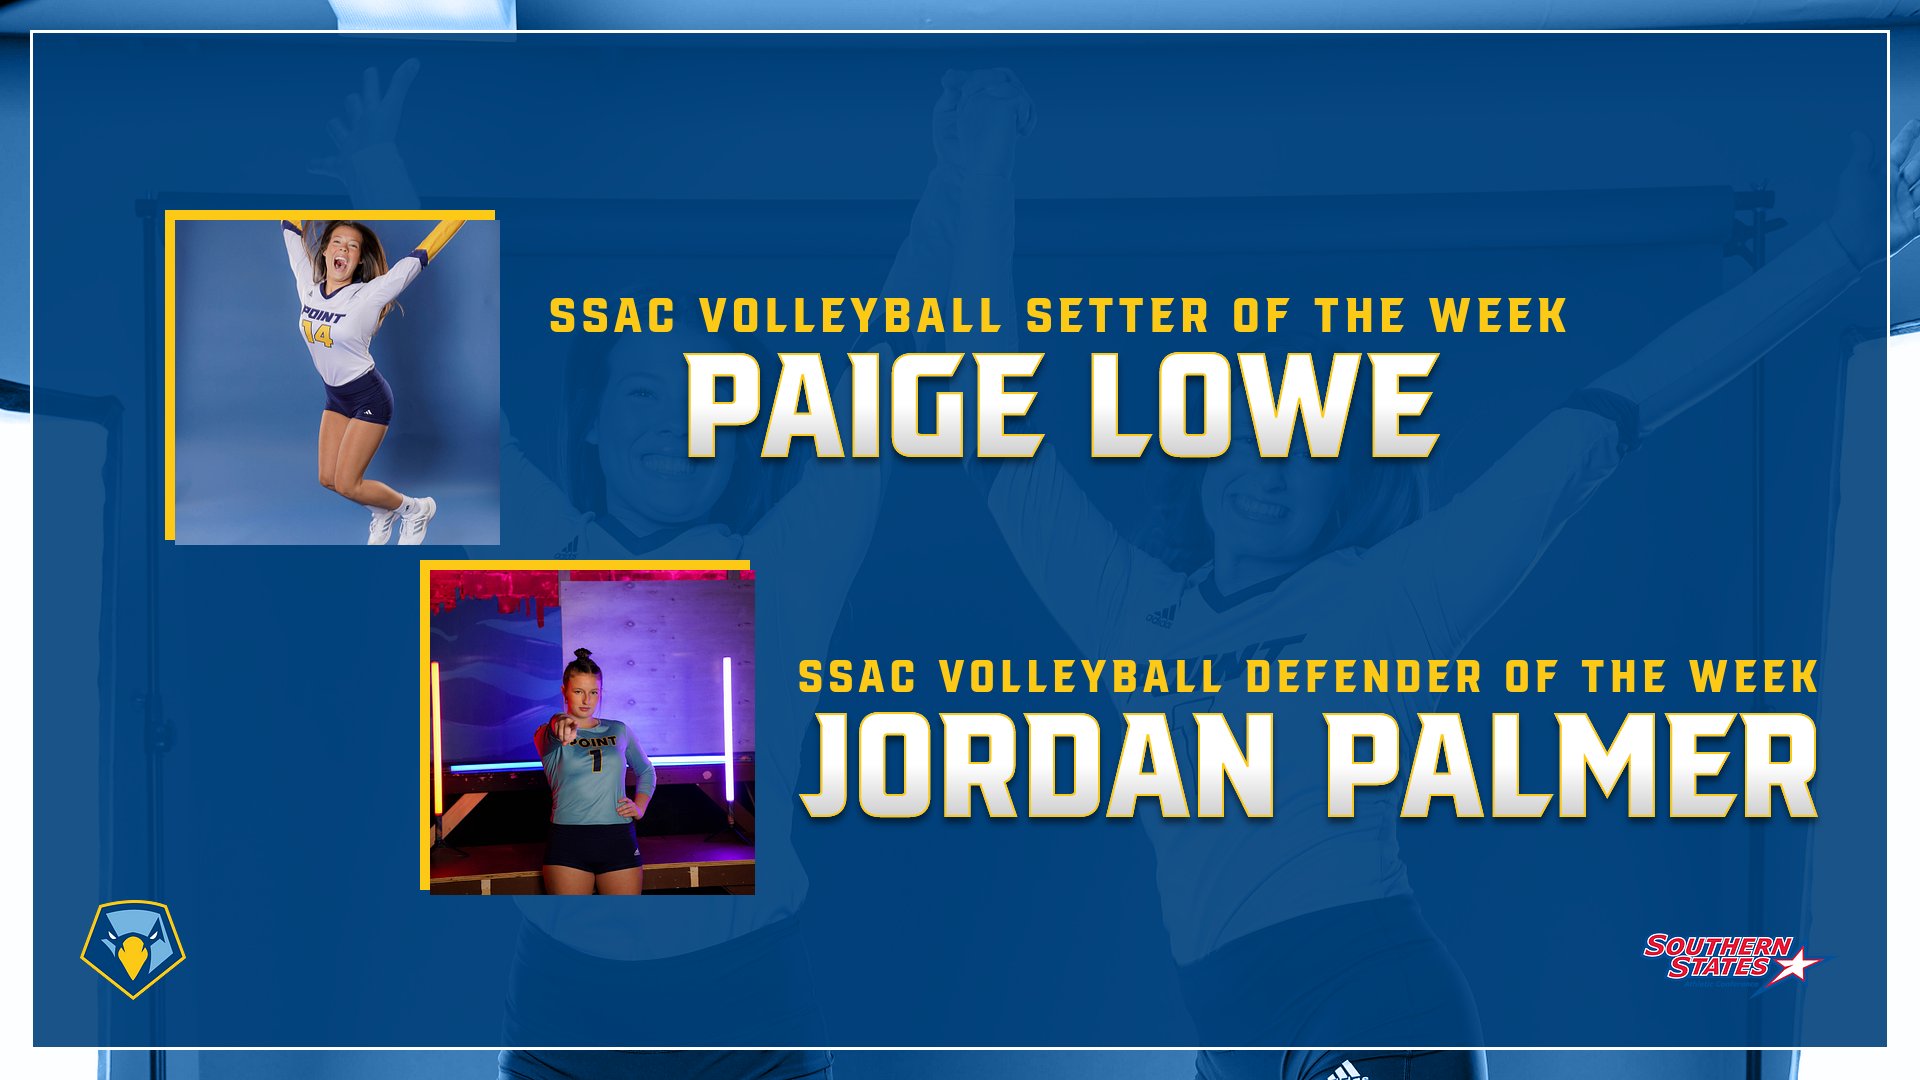 Paige Lowe and Jordan Palmer earn SSAC Volleyball Player of the Week Honors